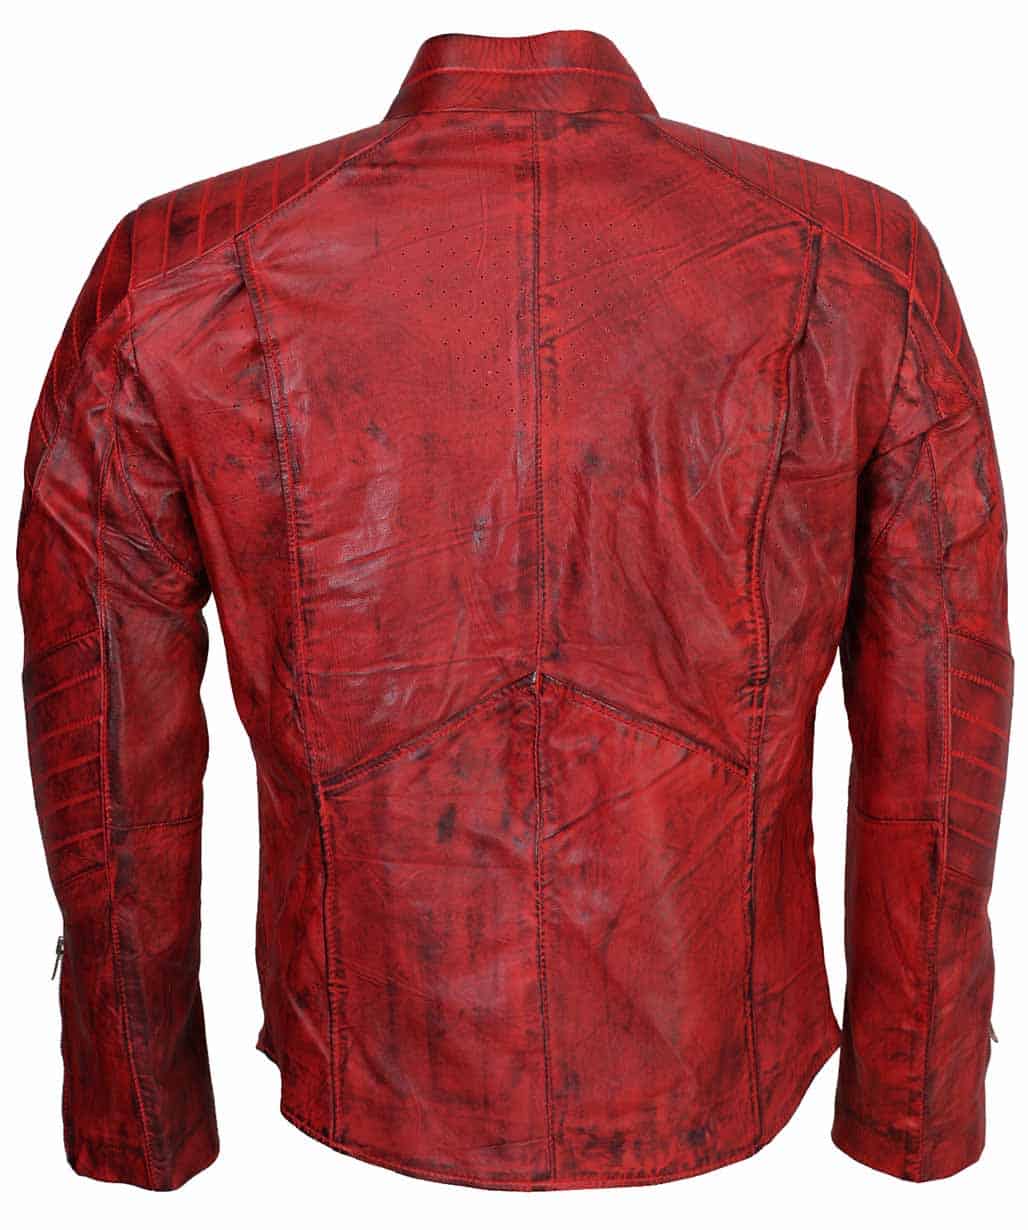 superman-red-waxed-leather-jacket-outfit-costume-real-leather